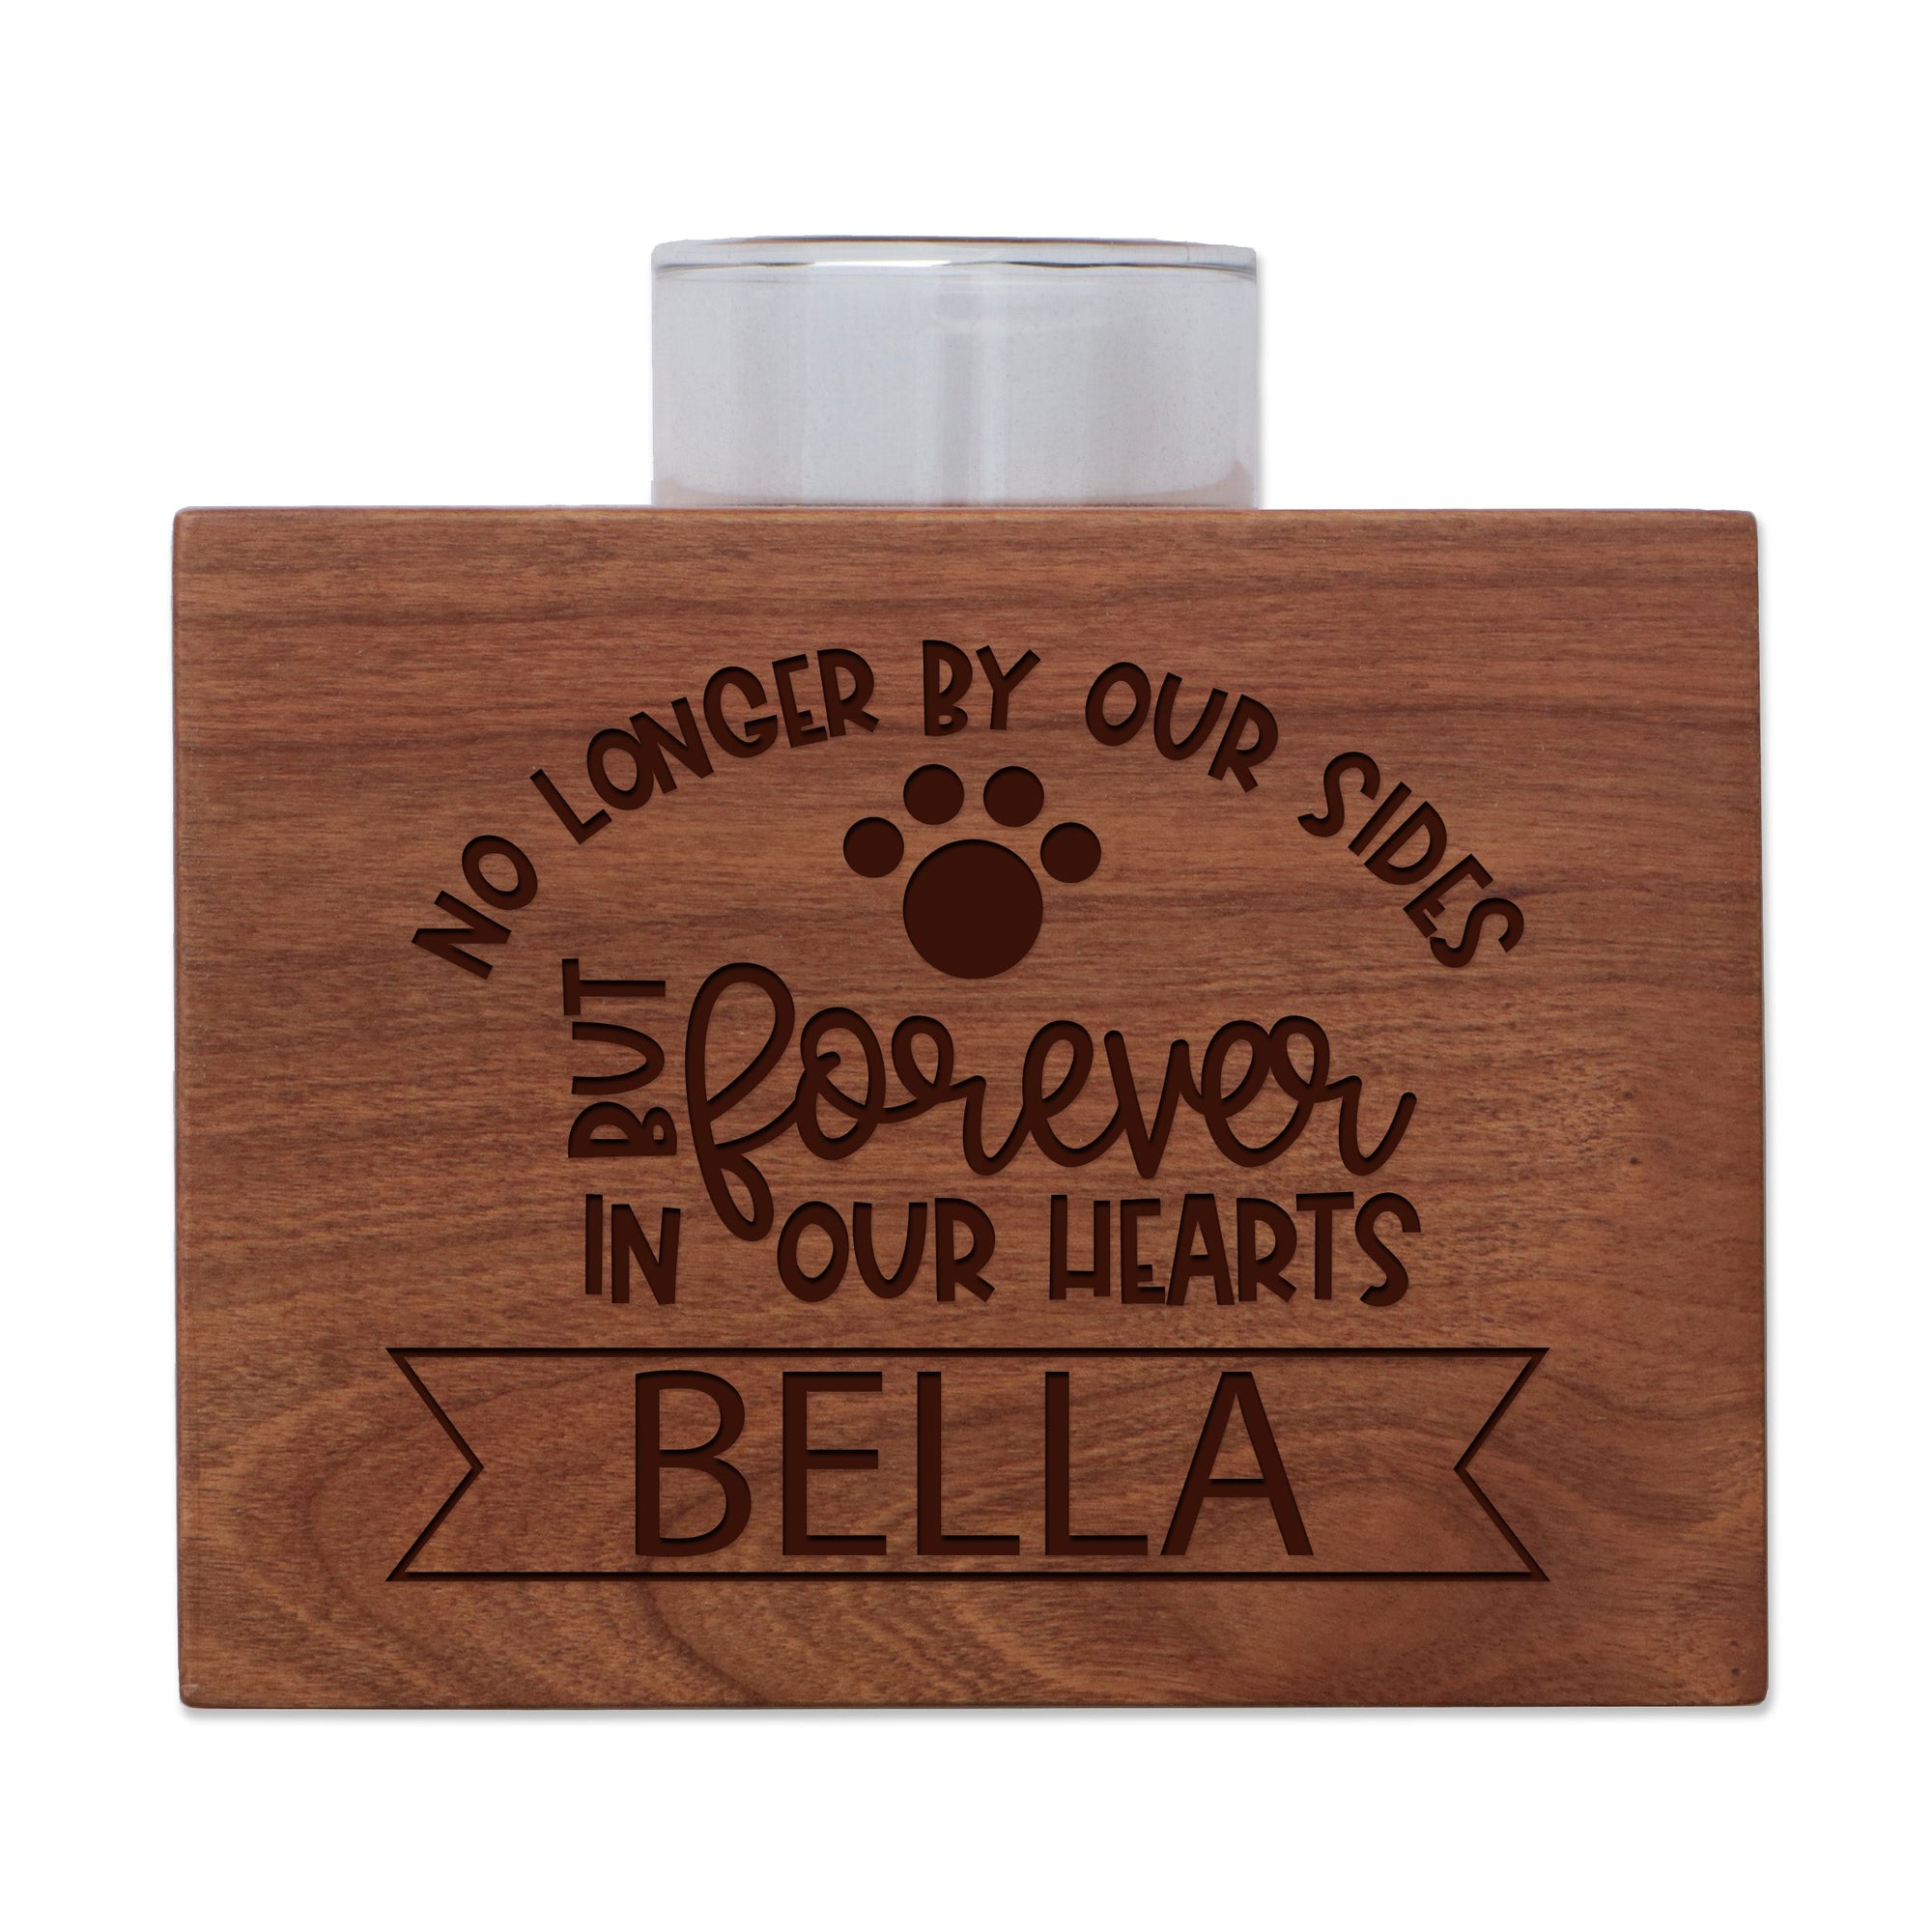 Pet Memorial Single Candle Holder - No Longer By Our Sides